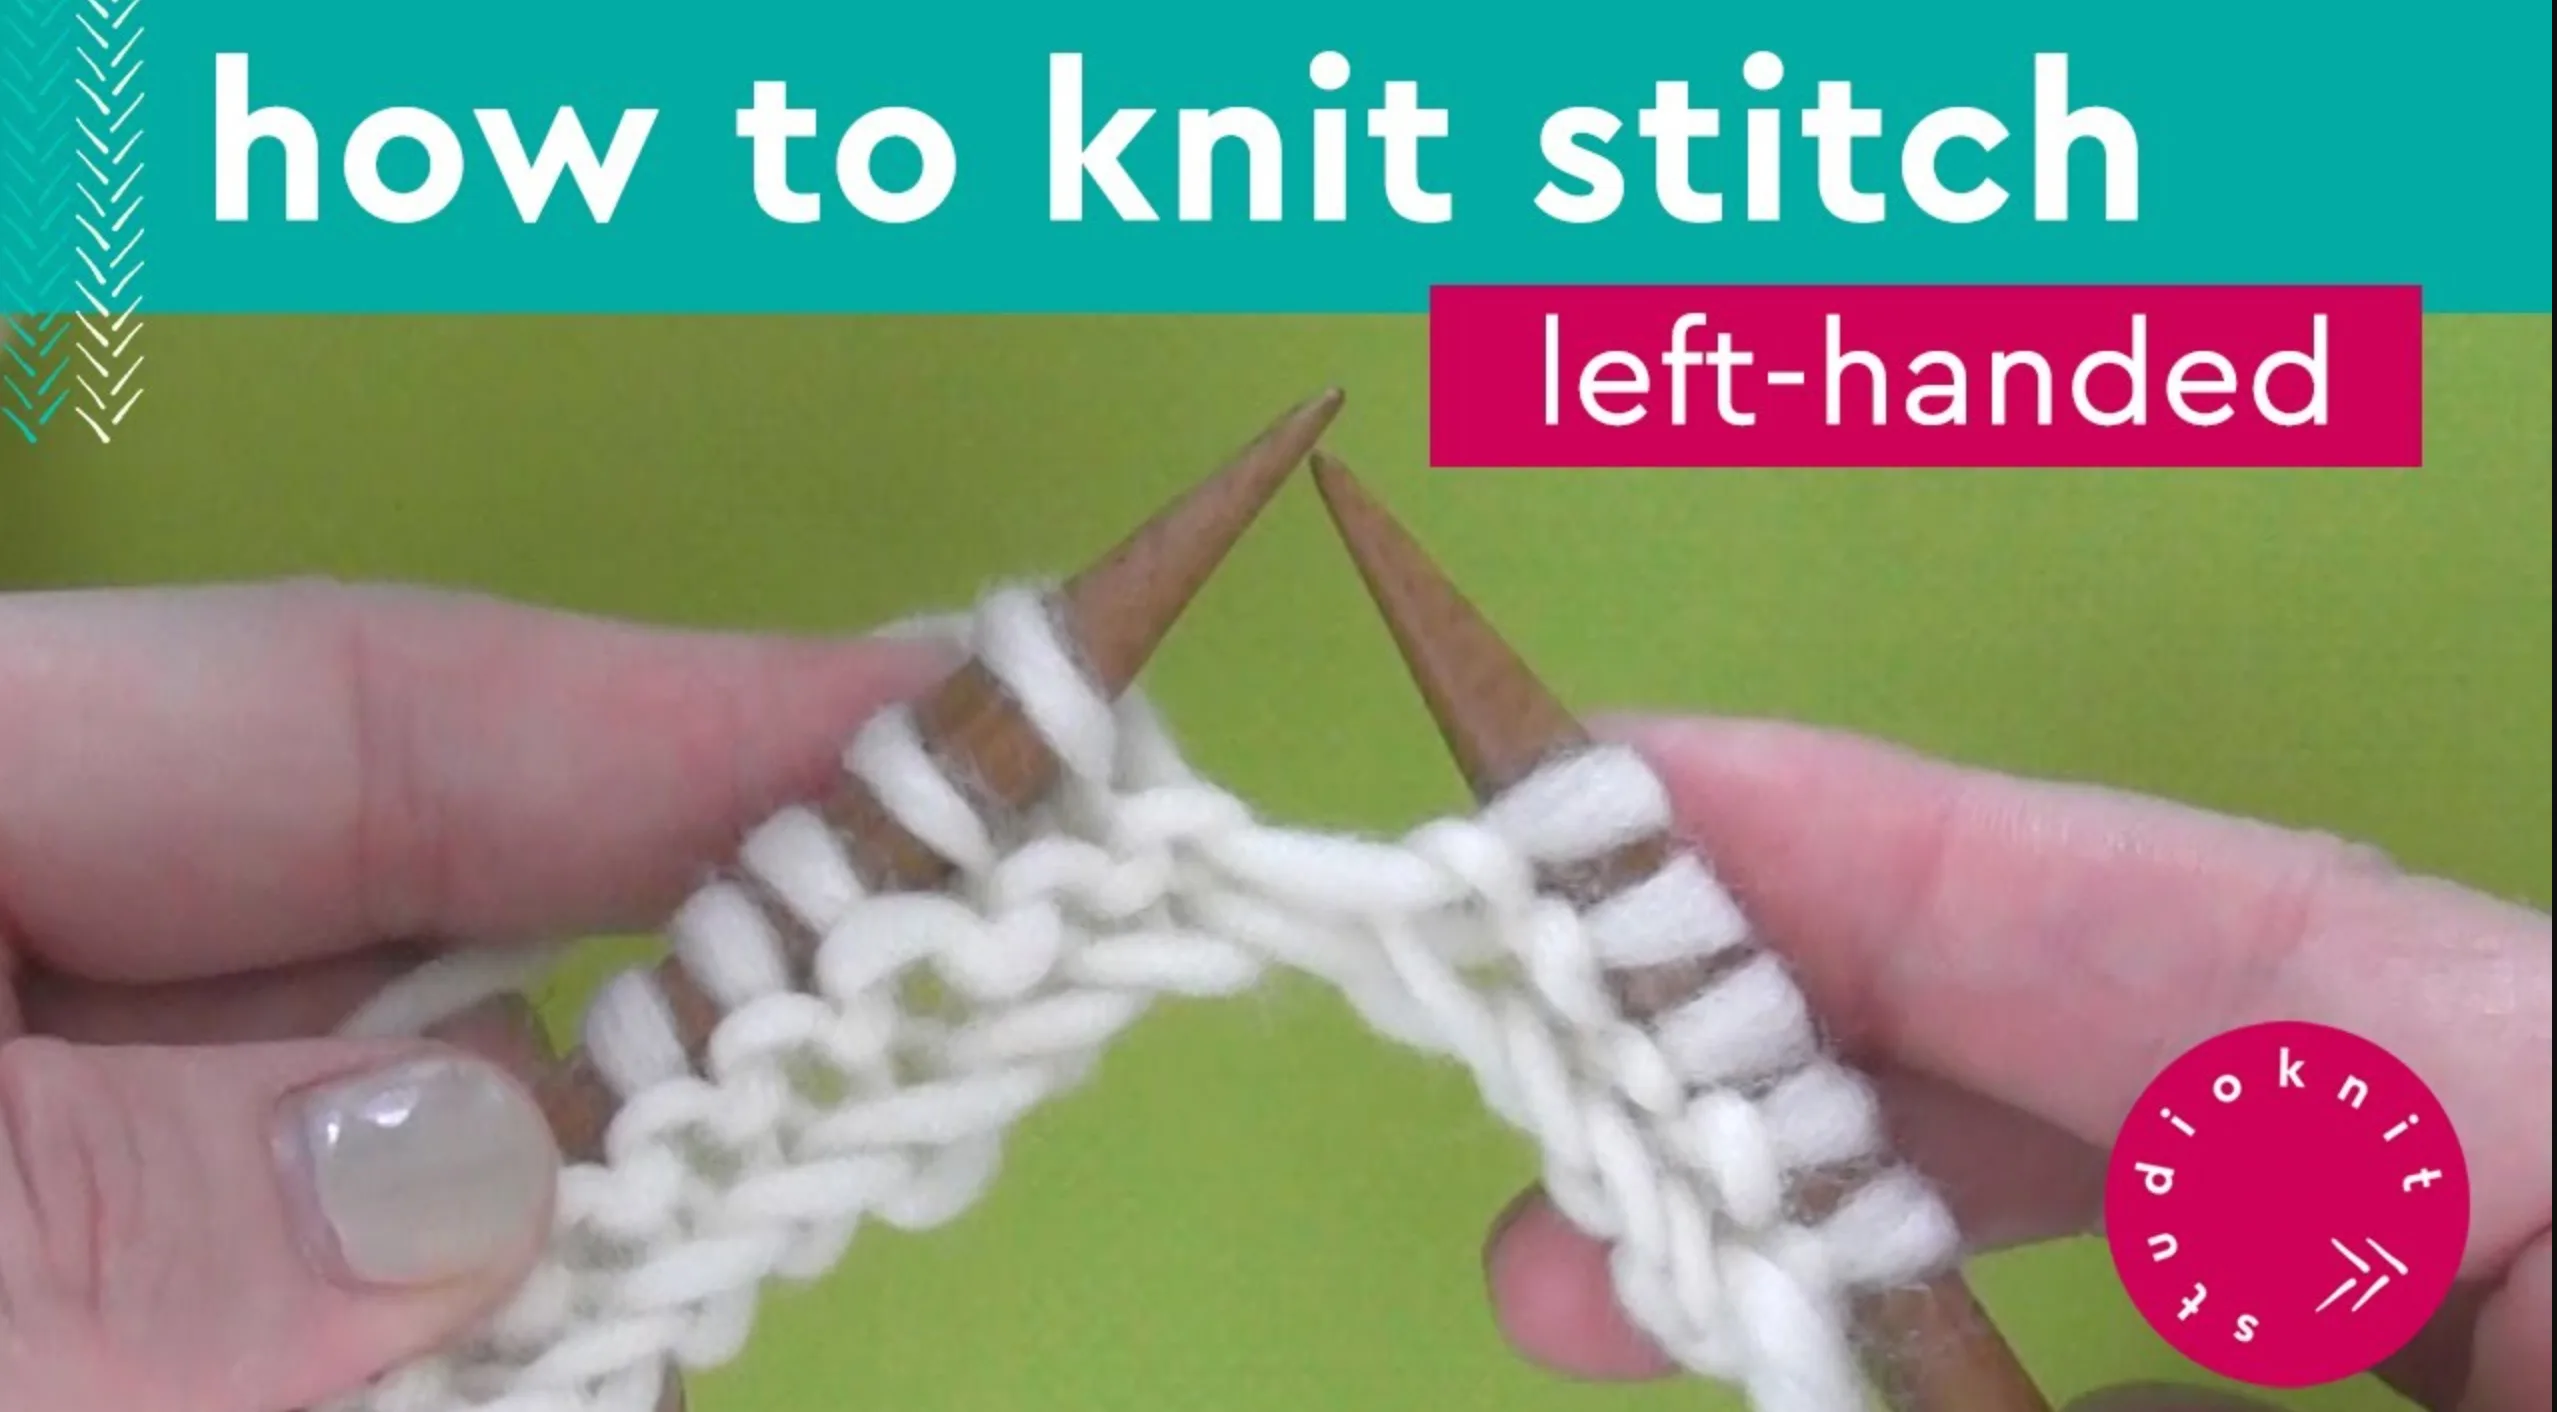 How to Knit Stitch left-handed video thumbnail.